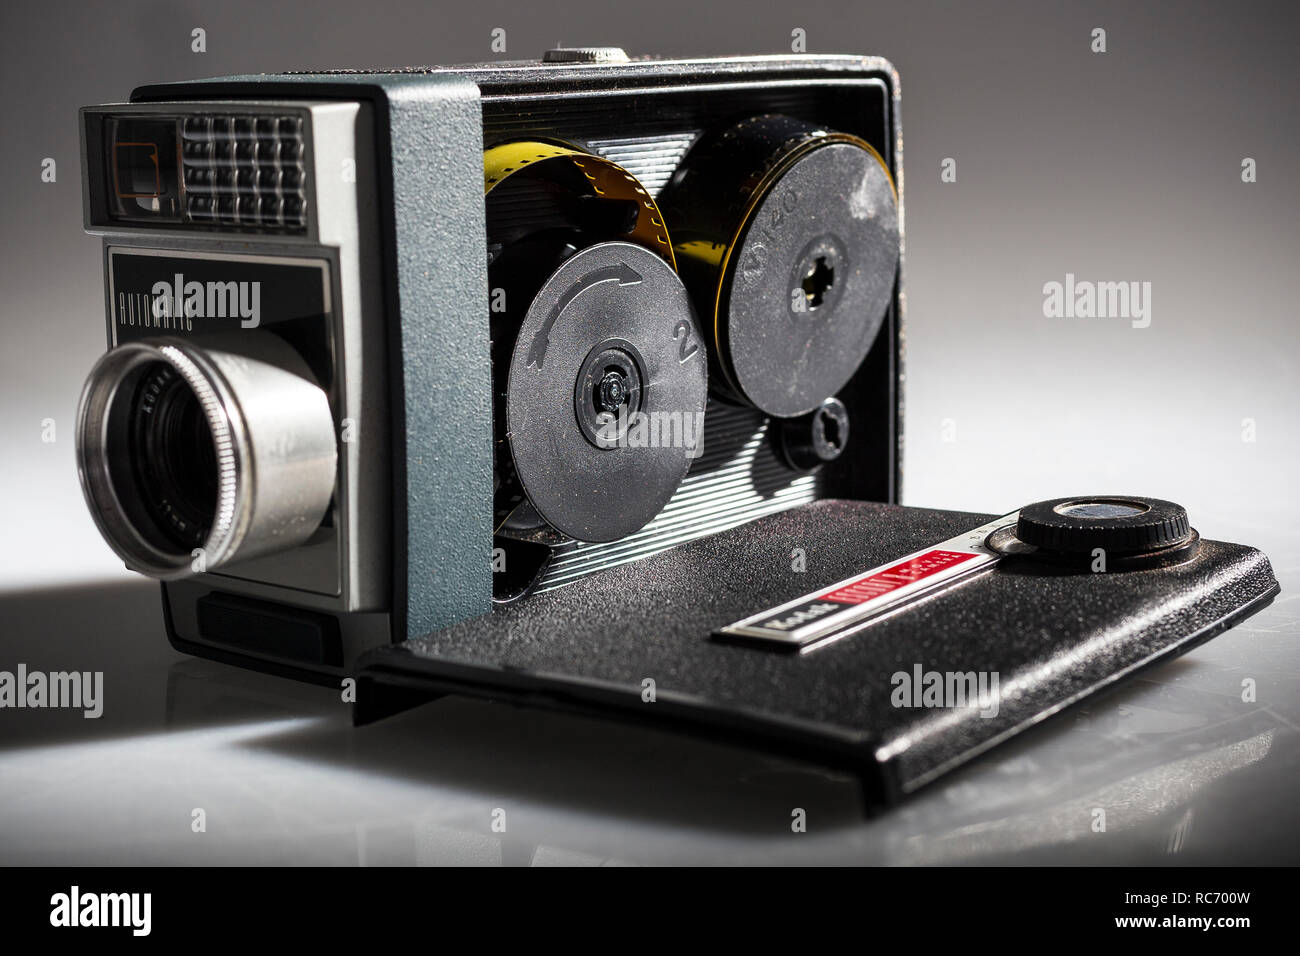 A Super 8mm camera is a motion picture camera specifically manufactured to use the Super 8mm motion picture format. Super 8mm film cameras Stock Photo